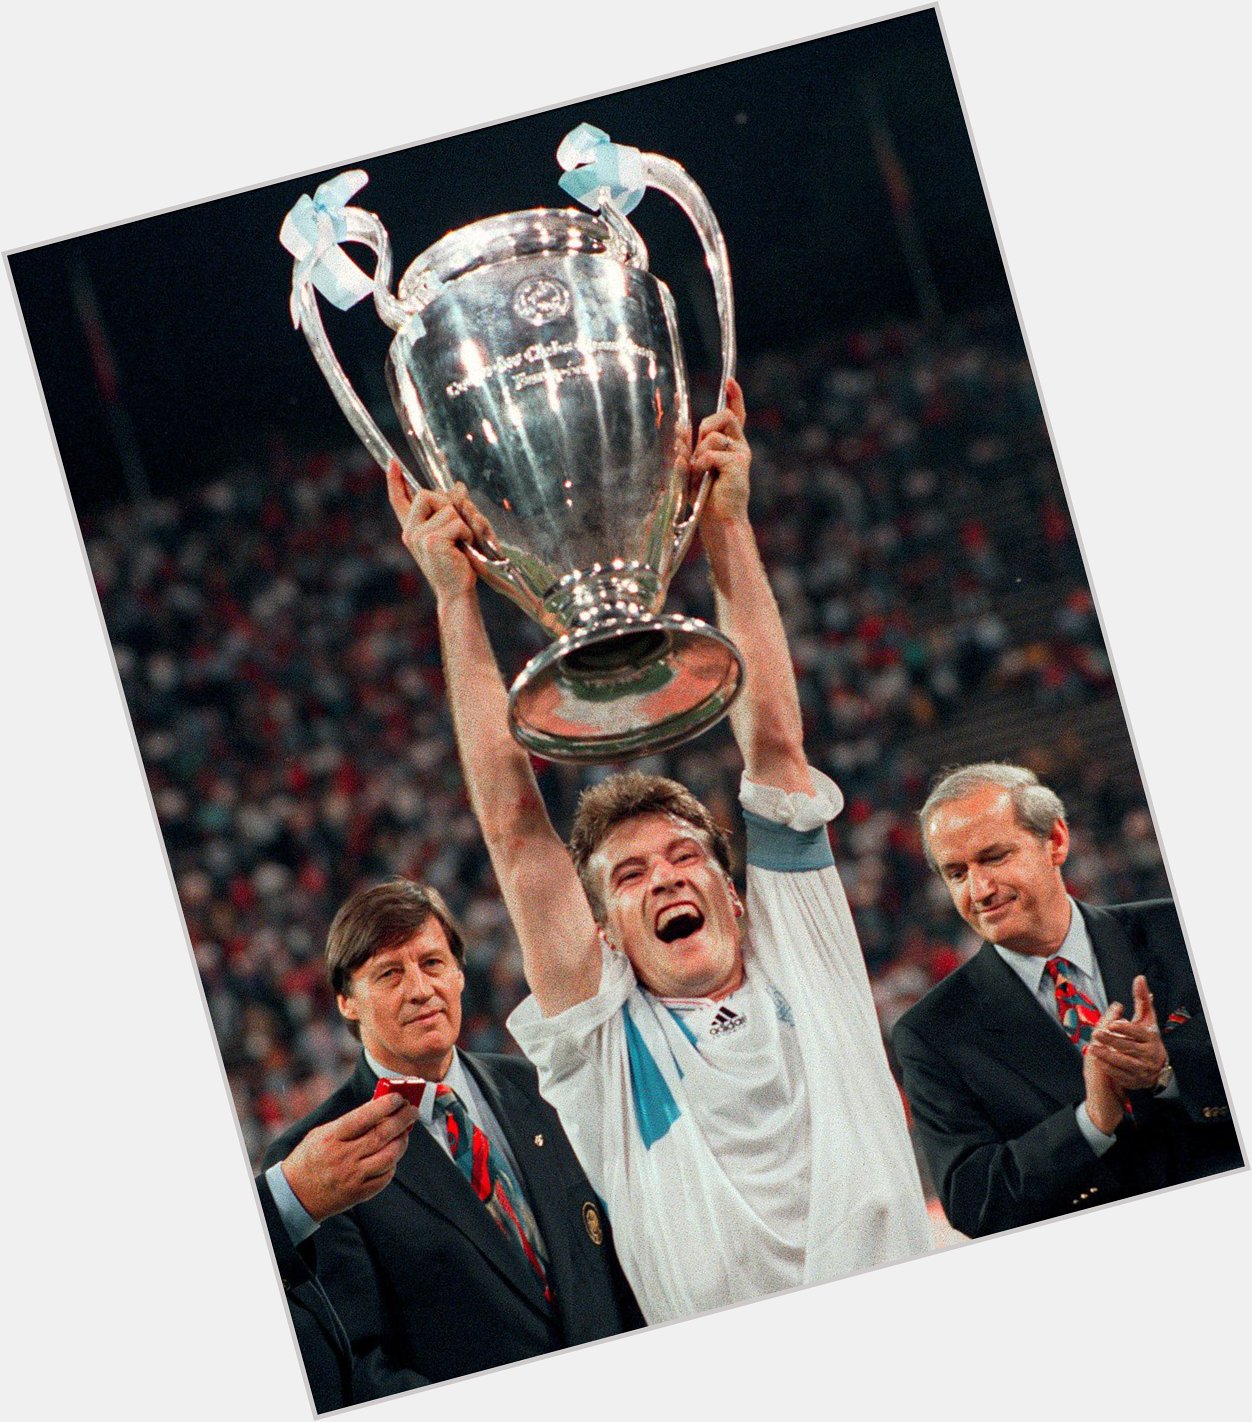 Happy Birthday to a player and manager who won everything...
Didier Deschamps.
(Photo 